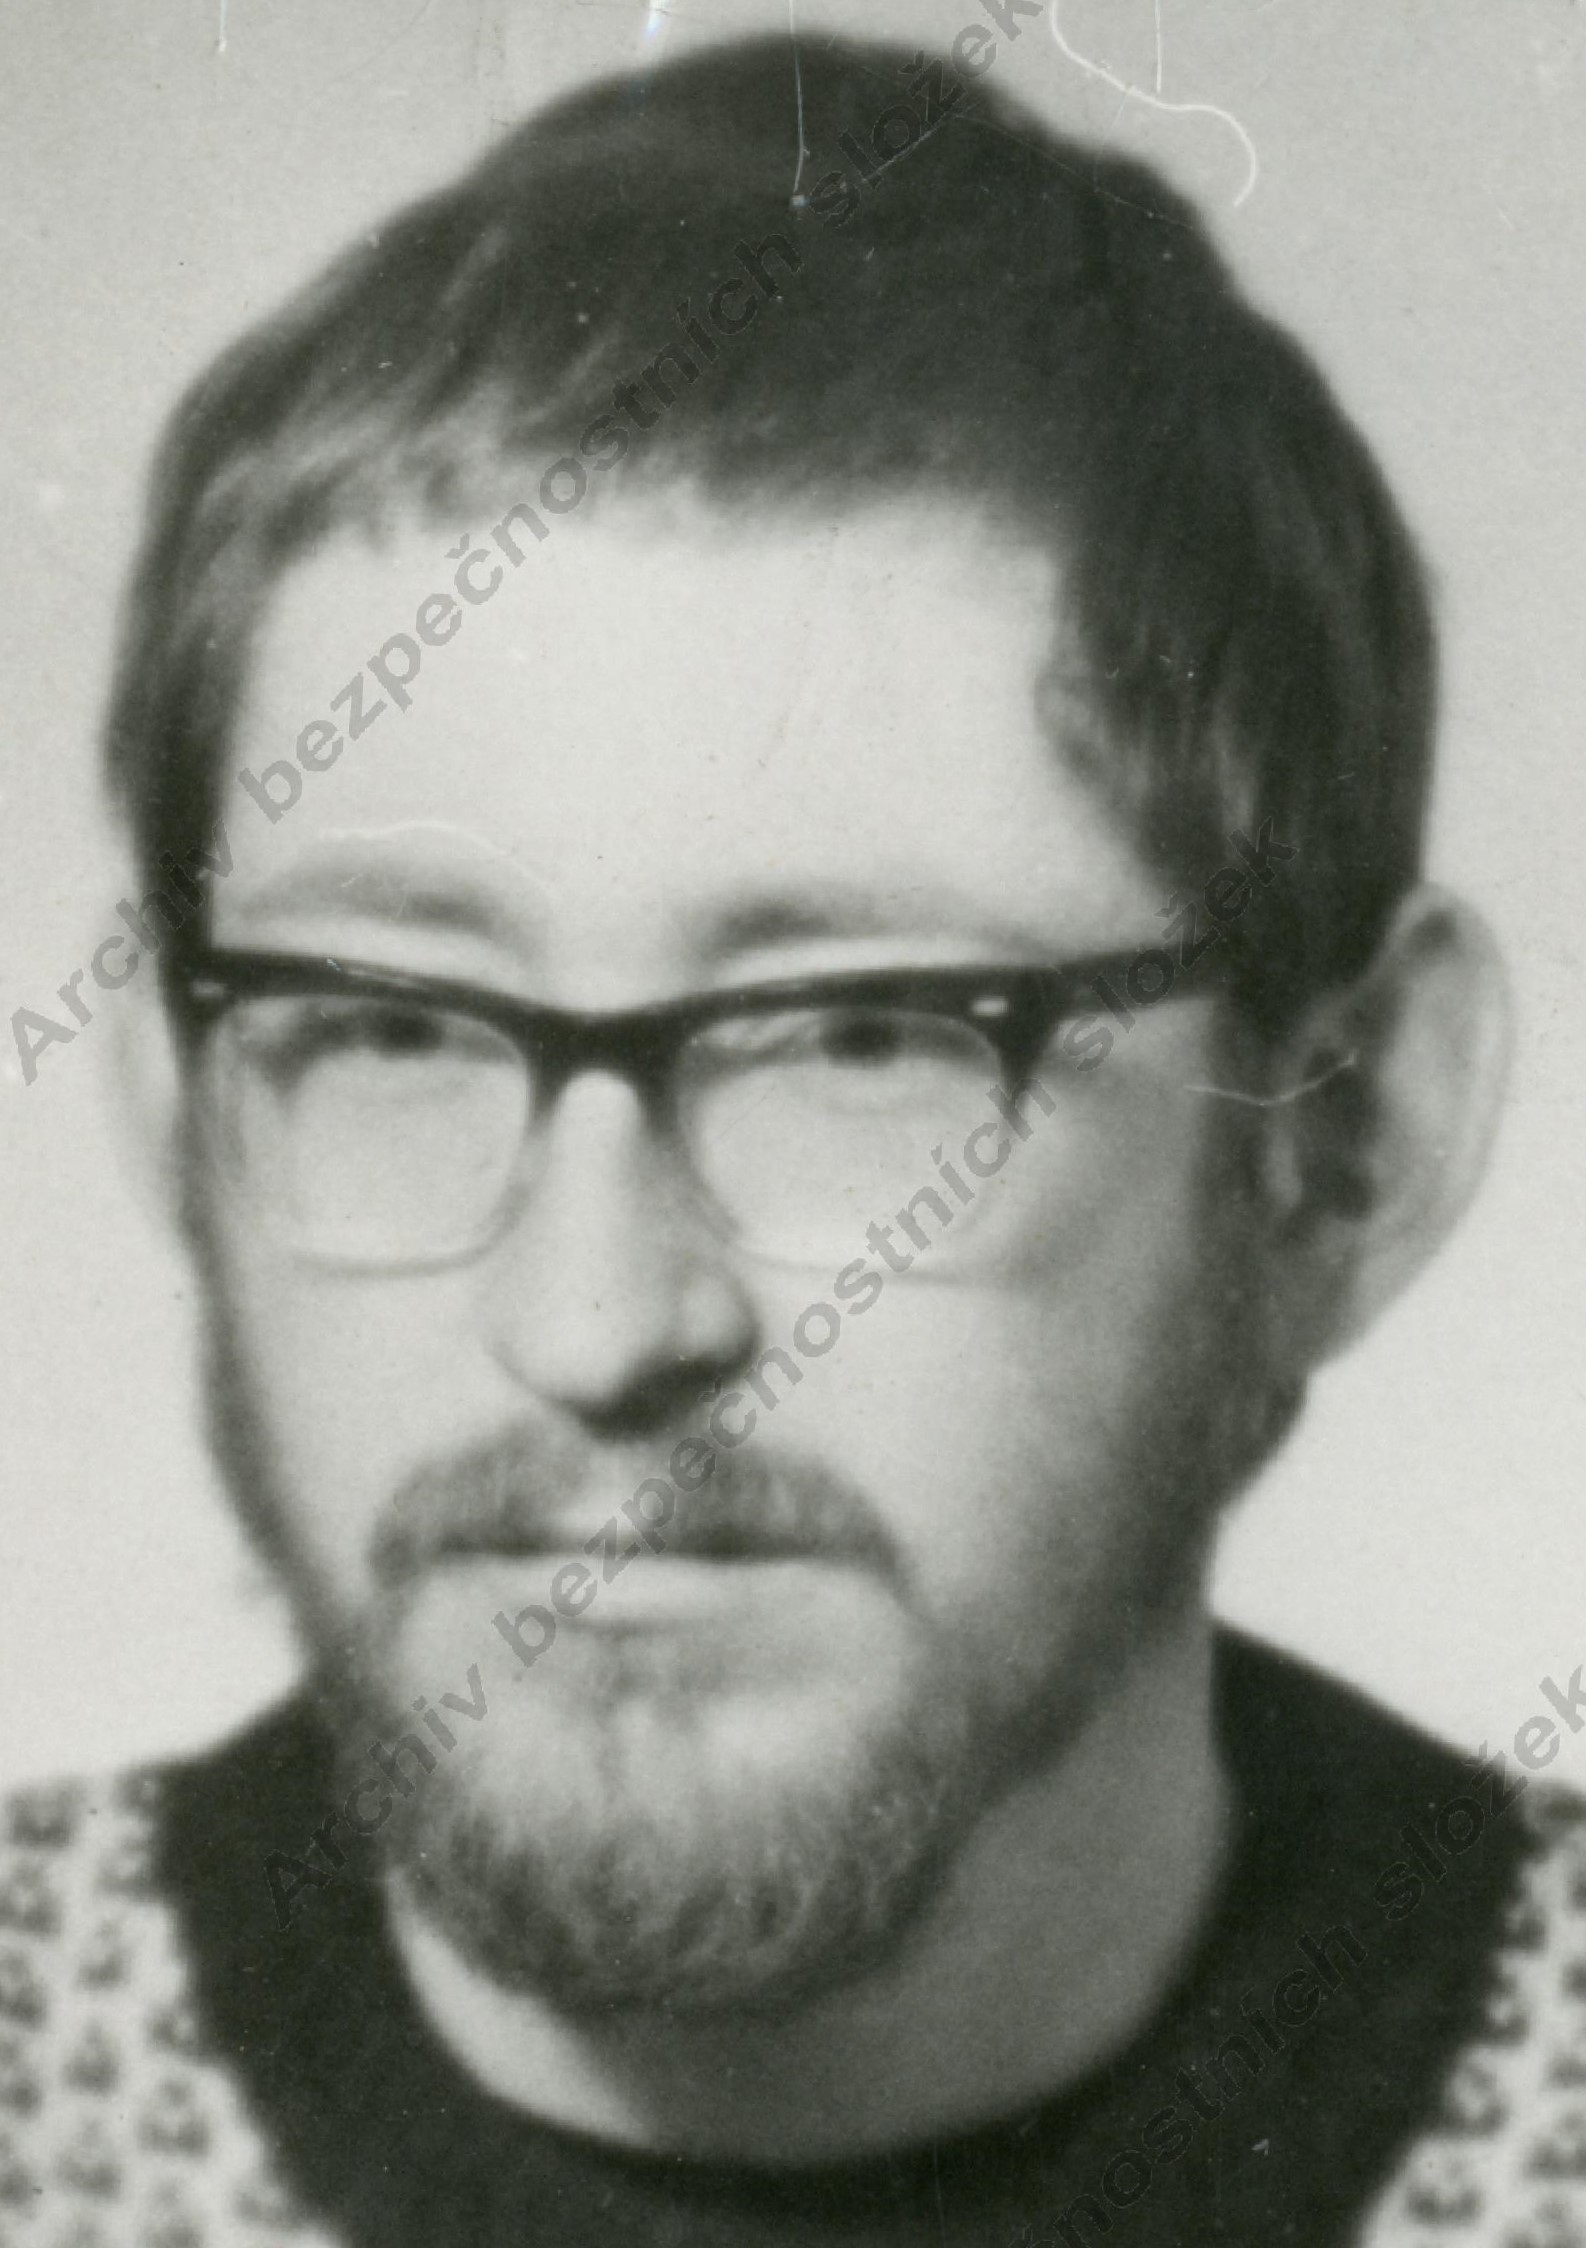 Gerald Turner in the 1970s